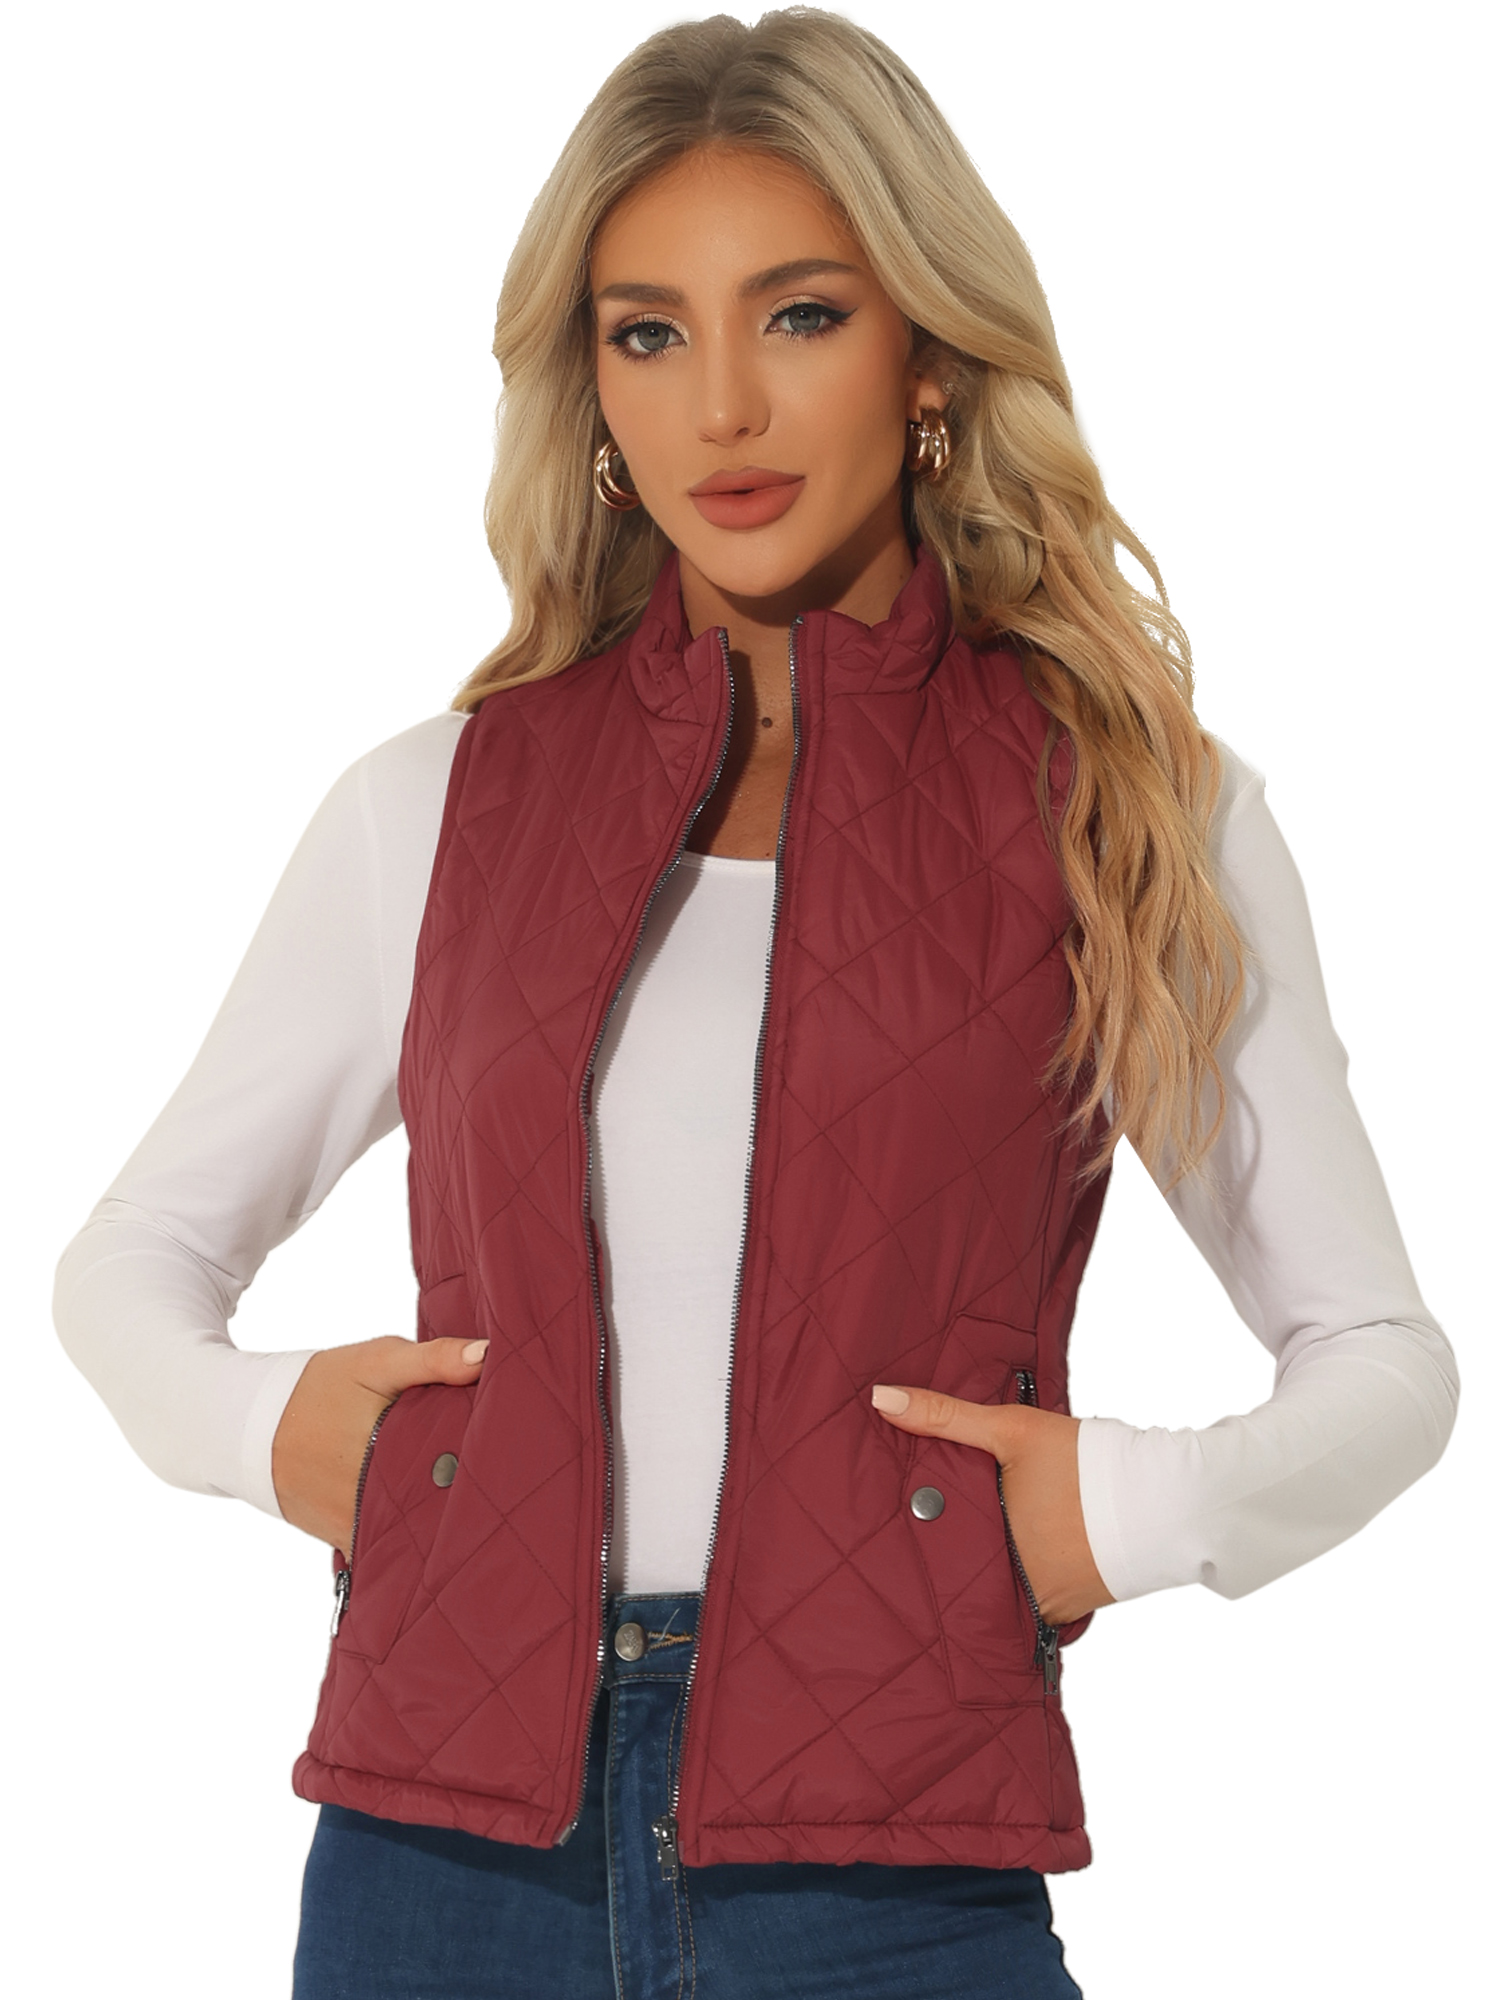 Unique Bargains Women's Zip Up Front Stand Collar Slant Pockets Quilted Padded Vest Red (Size L / 12)